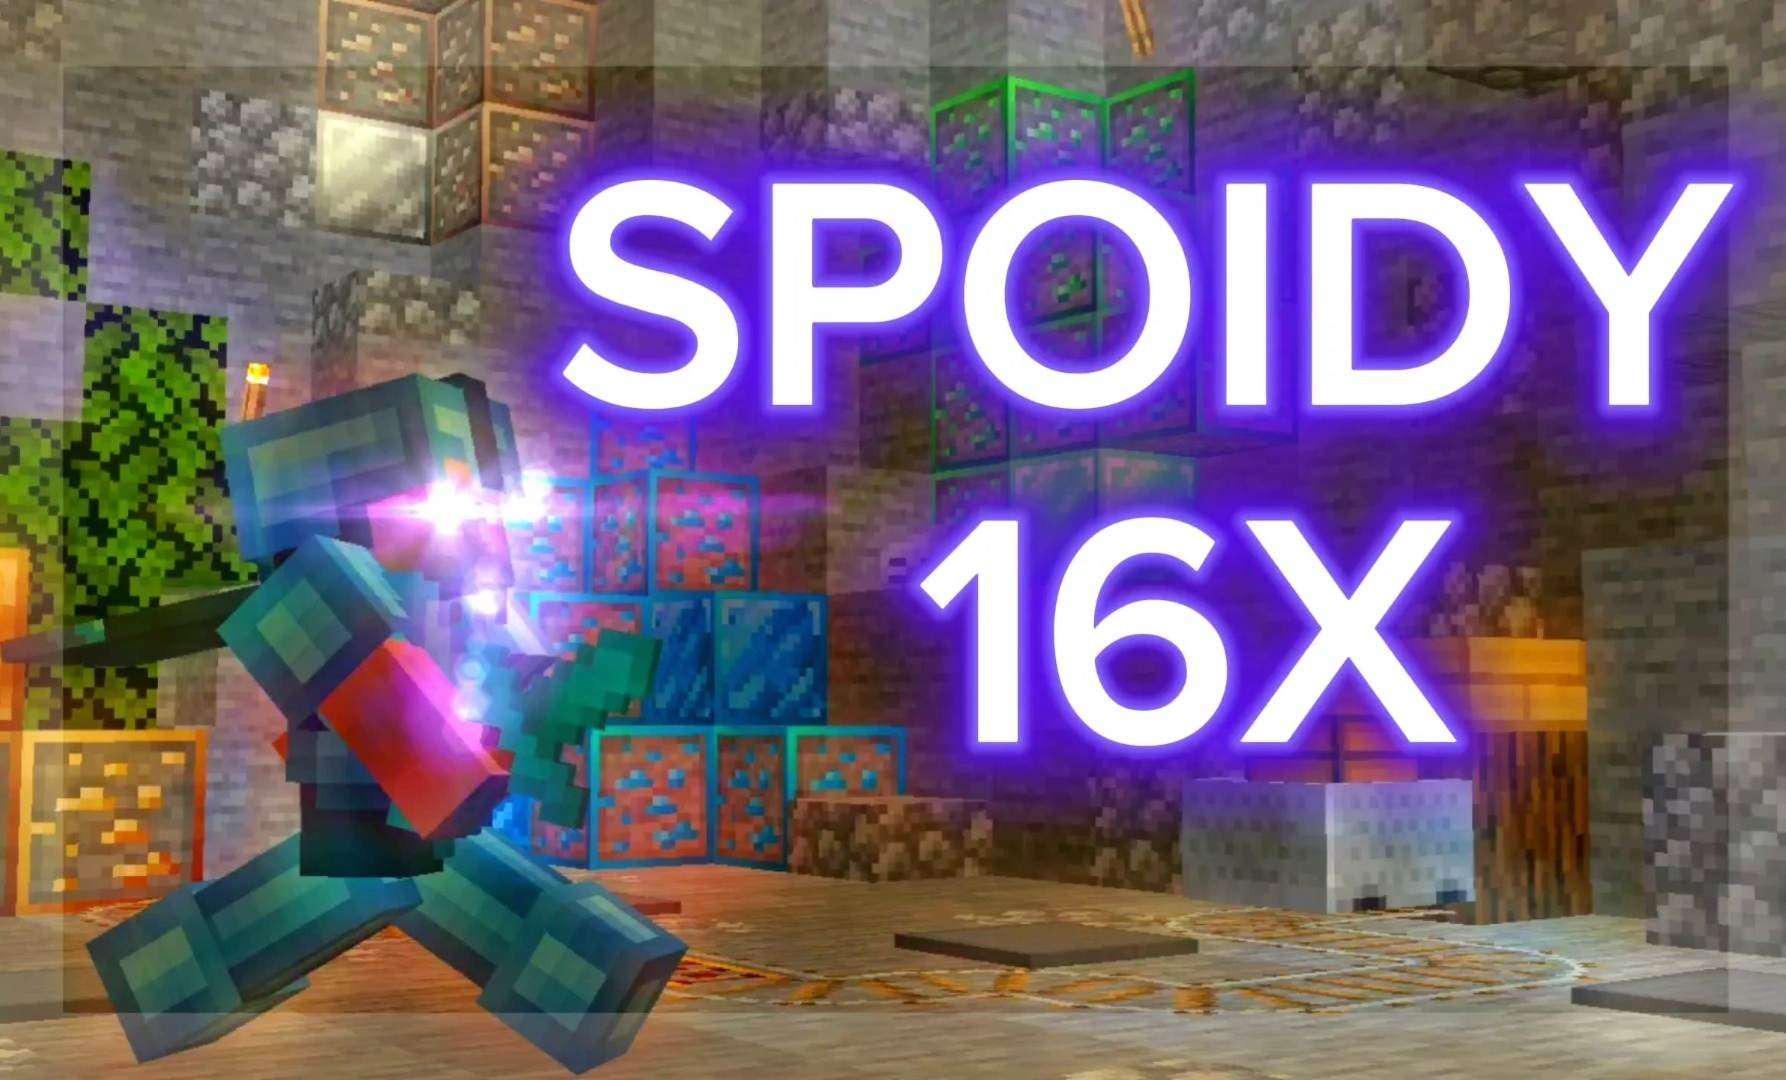 Spoidy 16x 16x by Spoidyy on PvPRP